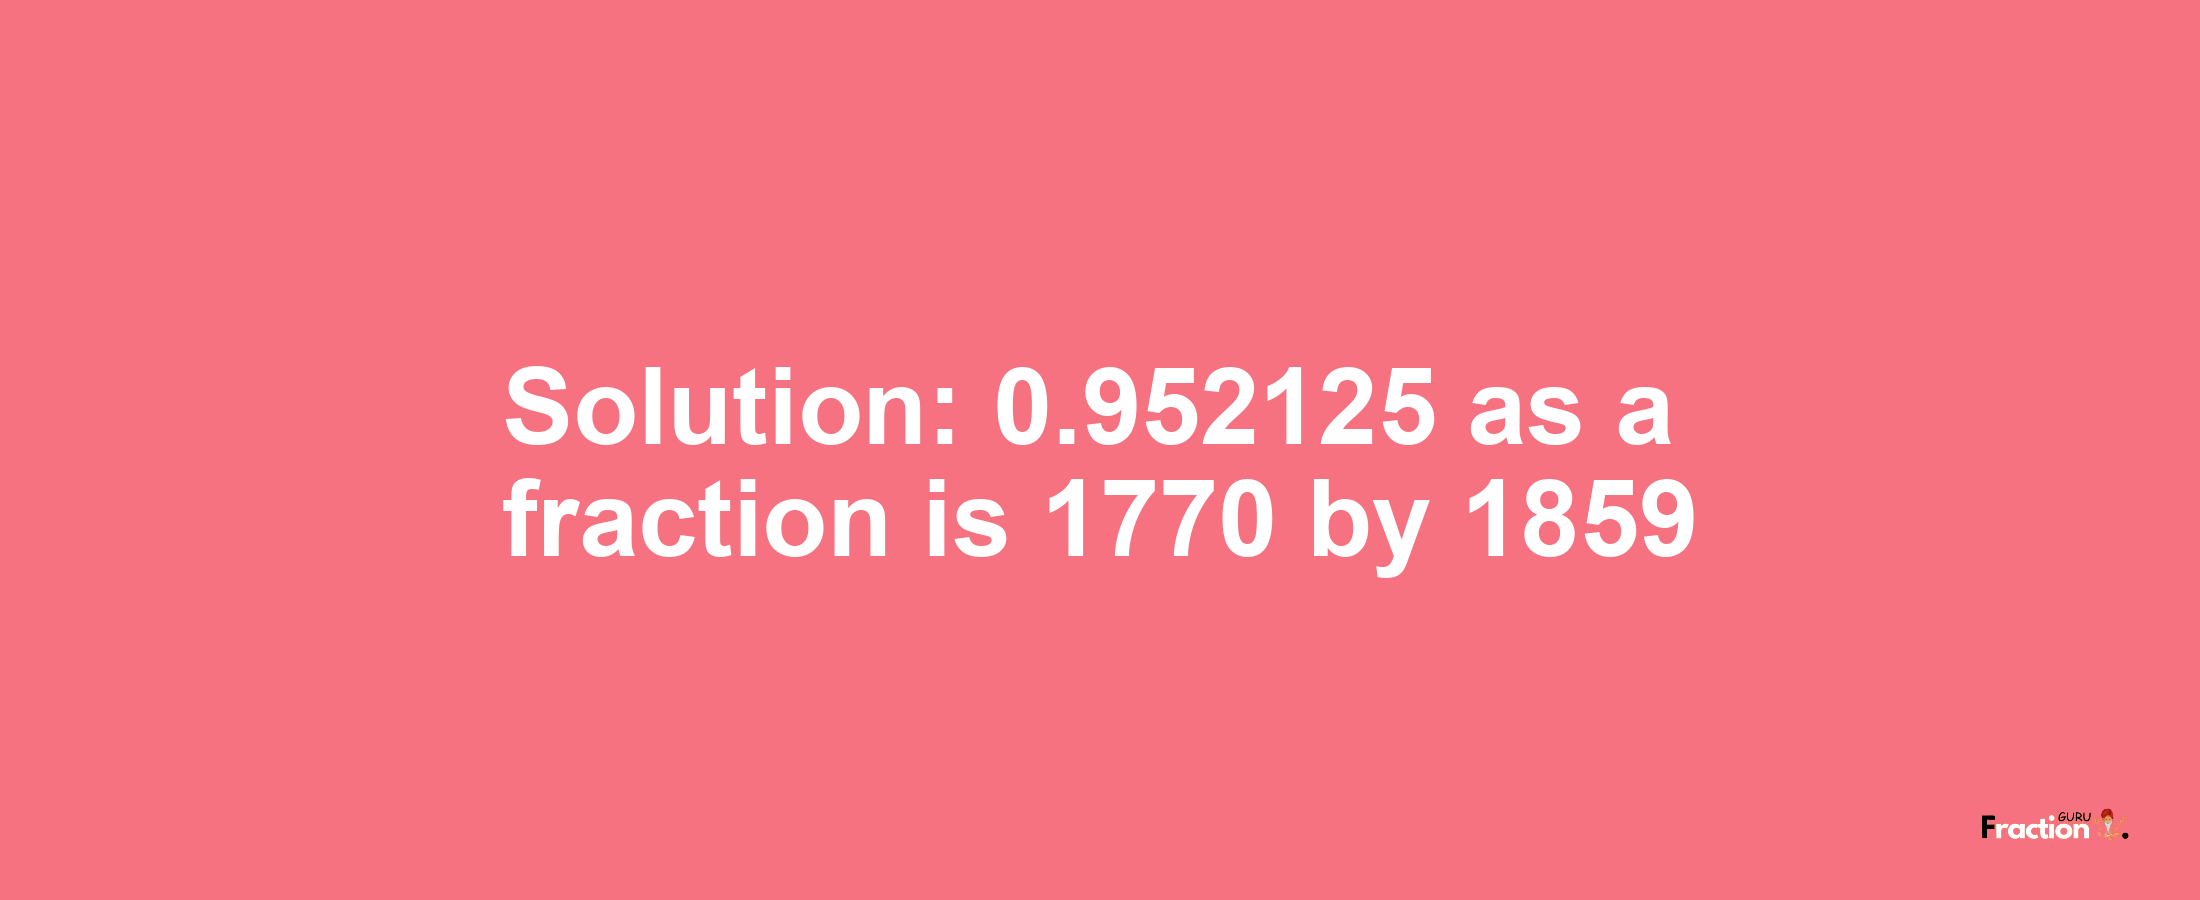 Solution:0.952125 as a fraction is 1770/1859